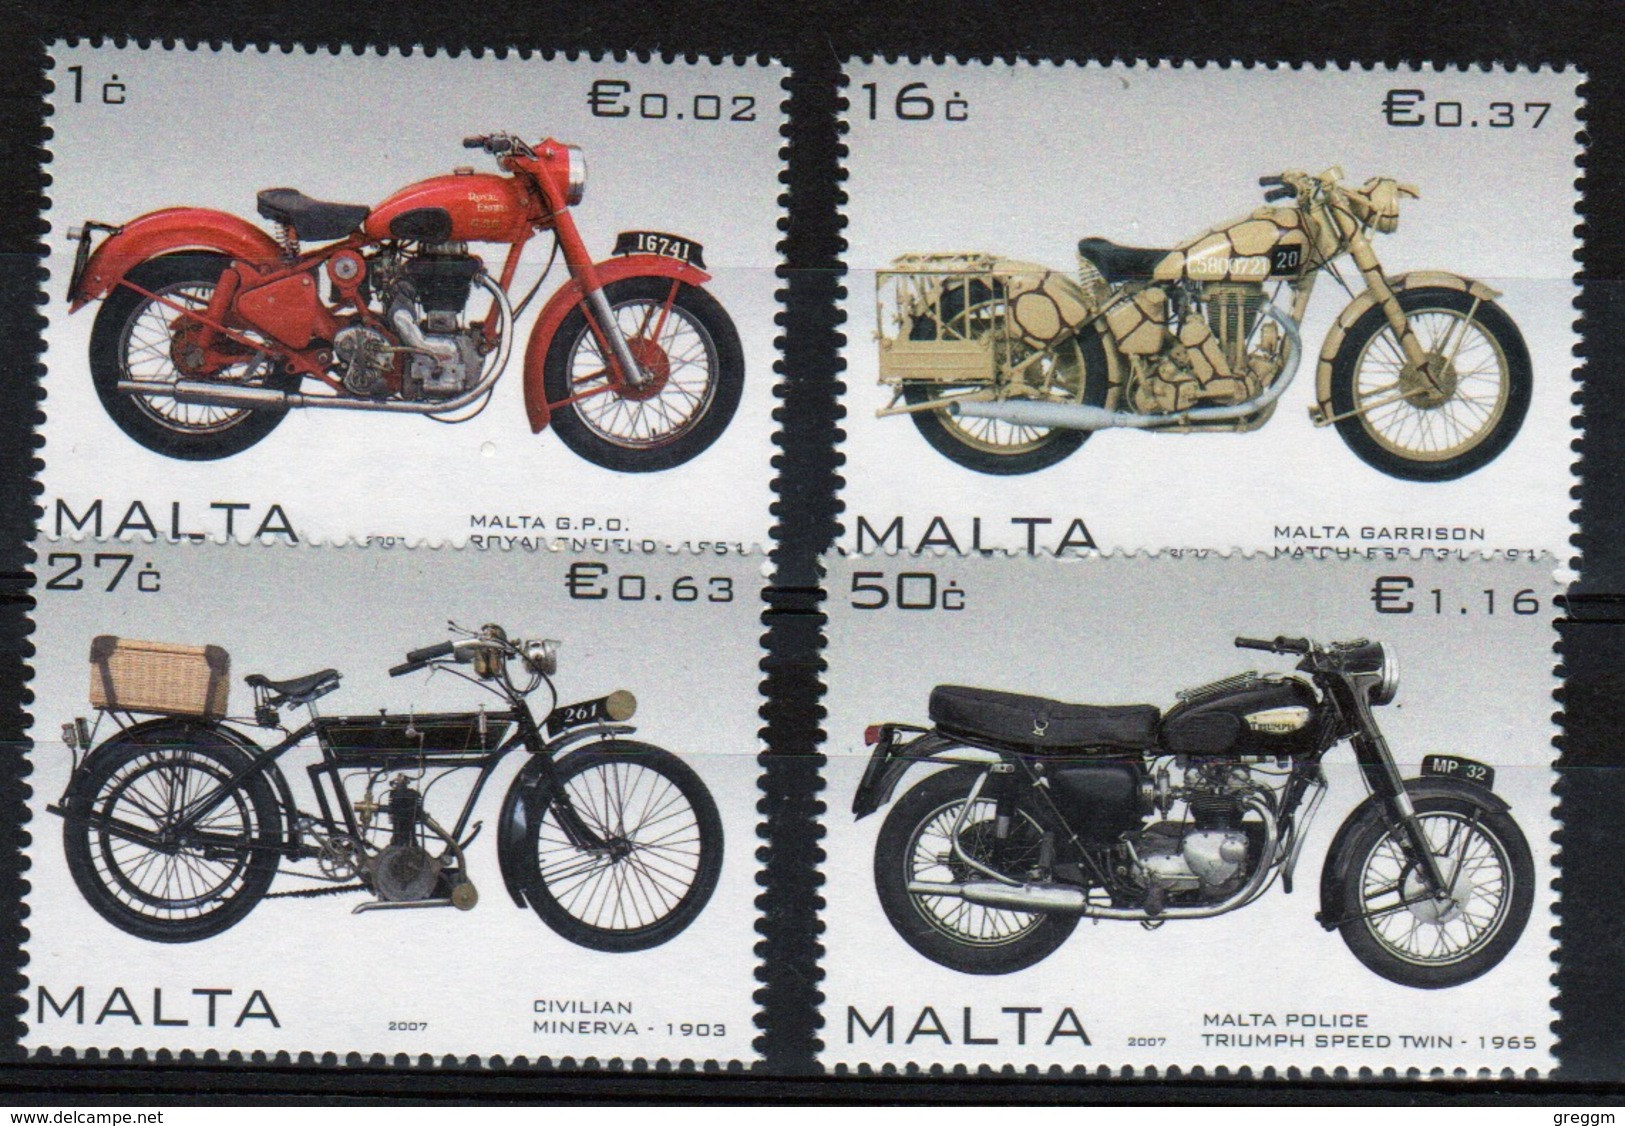 Malta Set Of Stamps From 2007 To Celebrate Motorcycles. - Malta